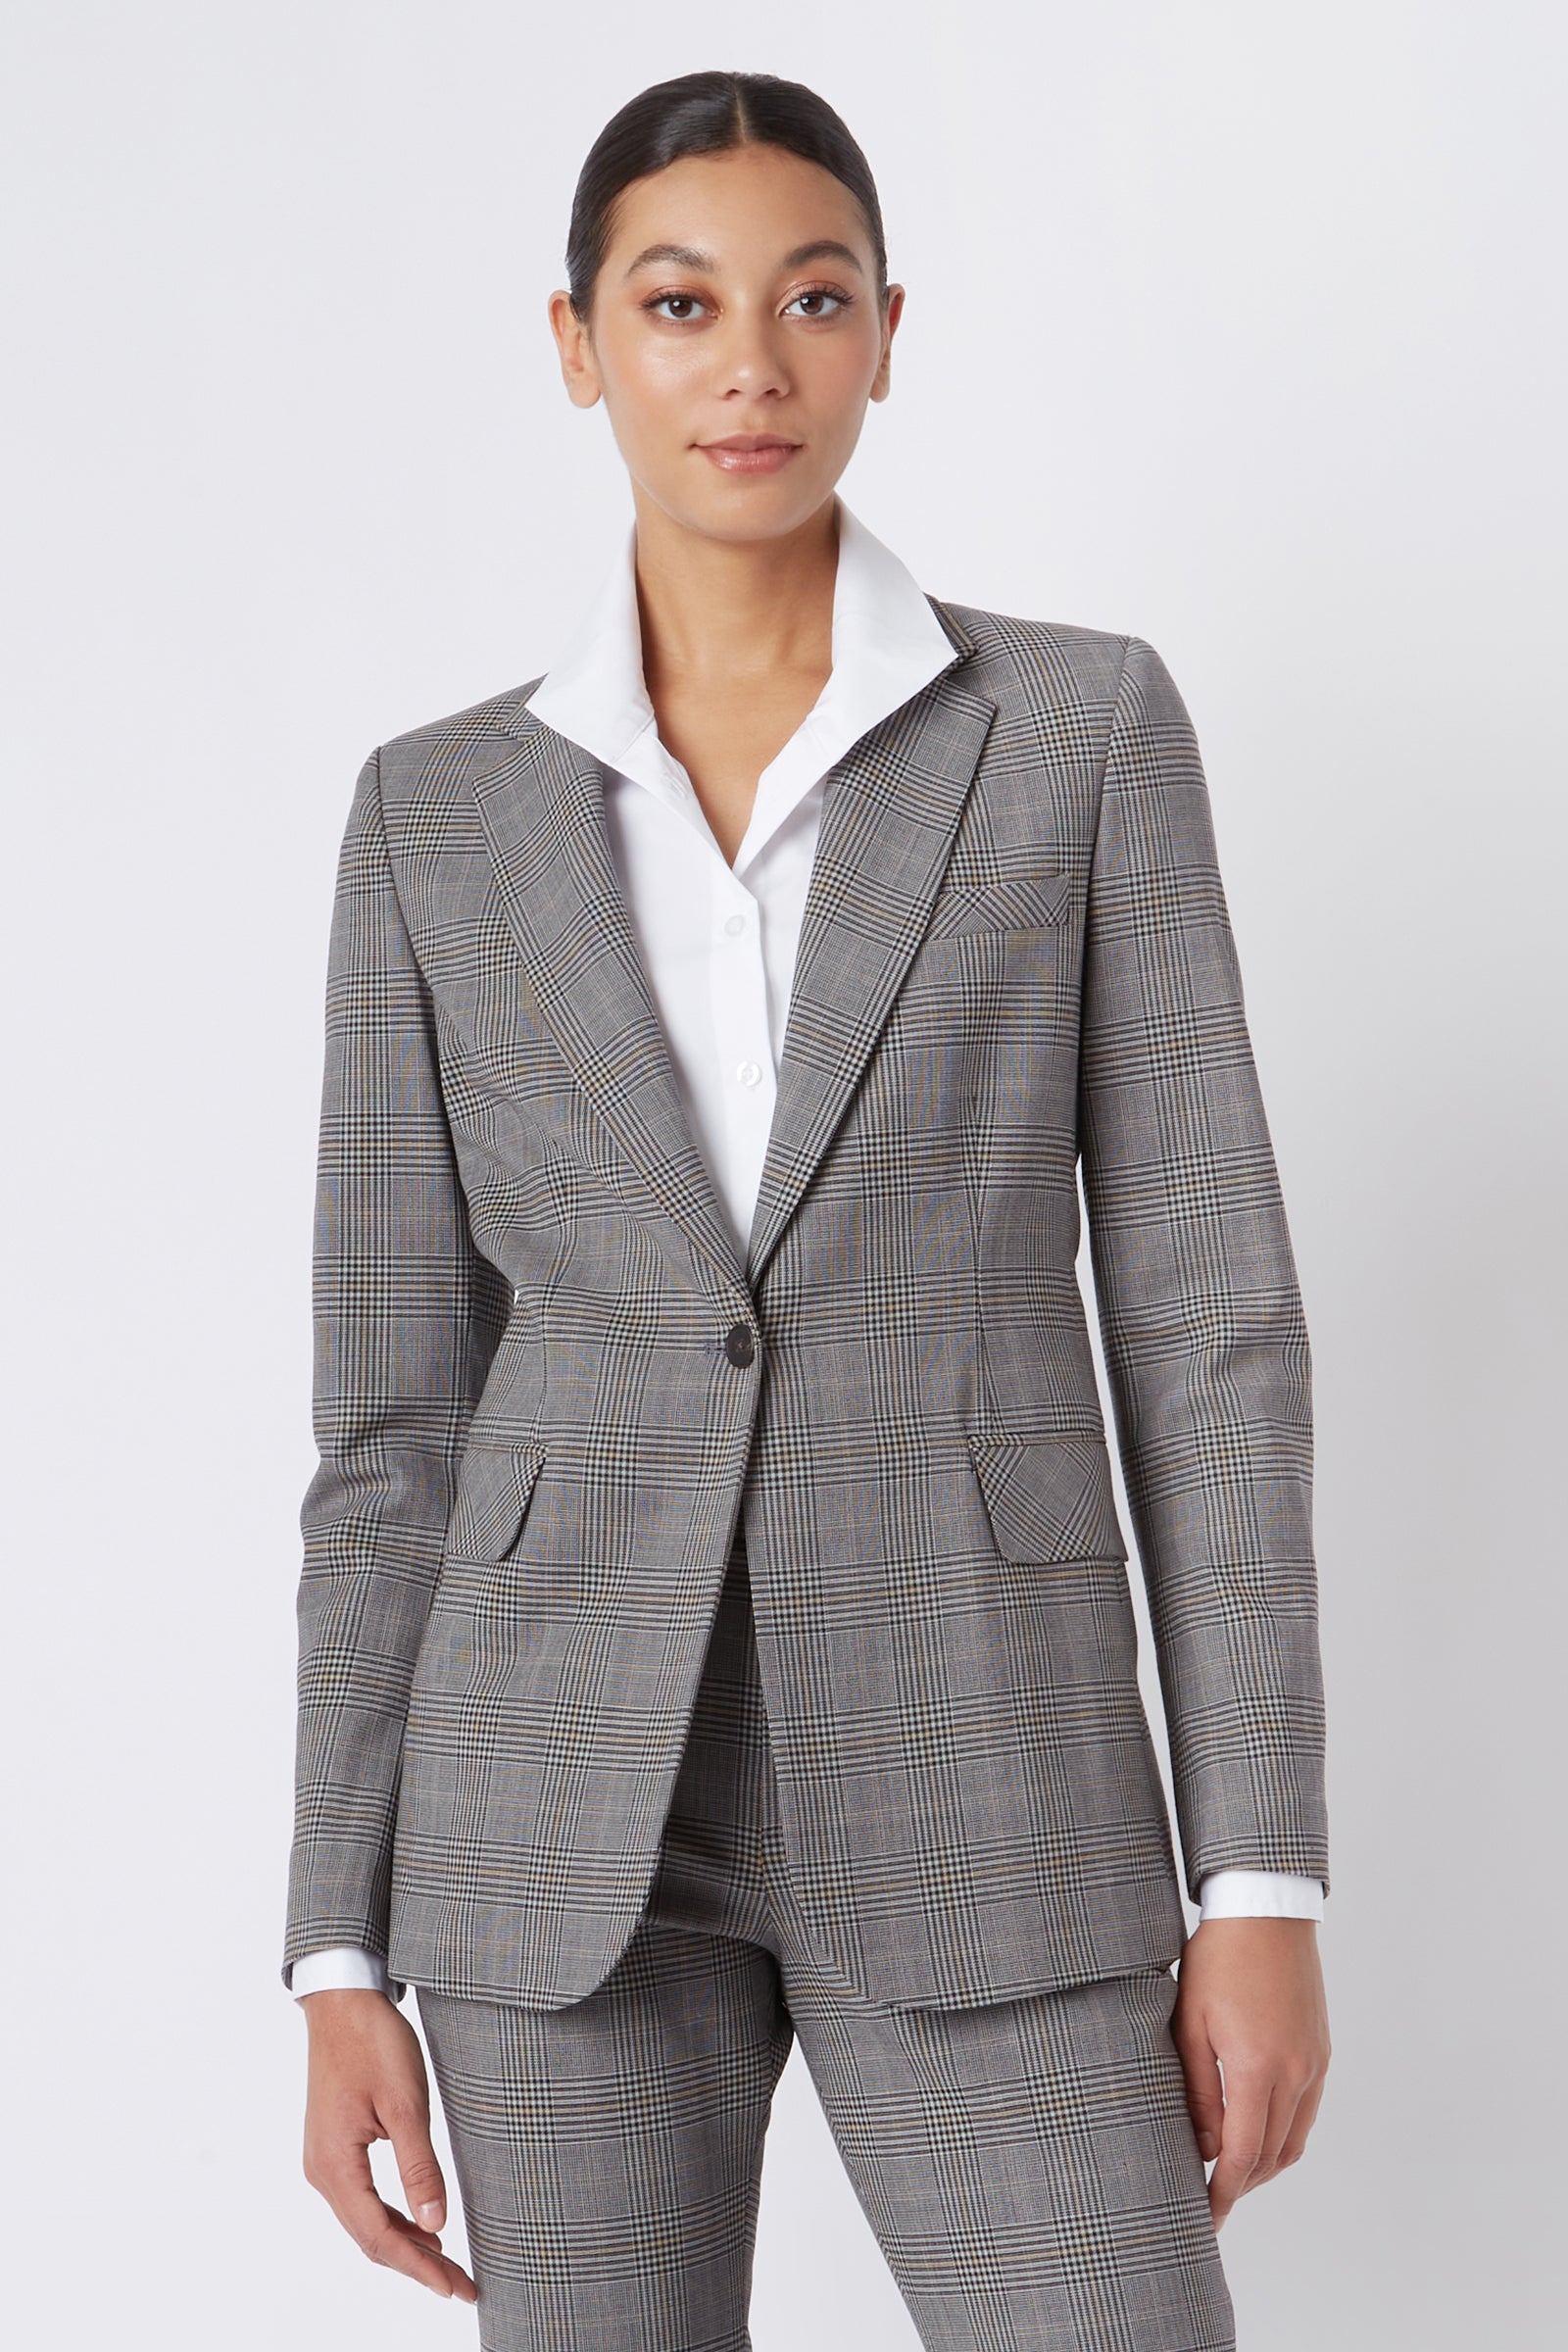 Kal Rieman Madeline Classic Notch Collar Blazer in Glen Plaid on Model Cropped Front View